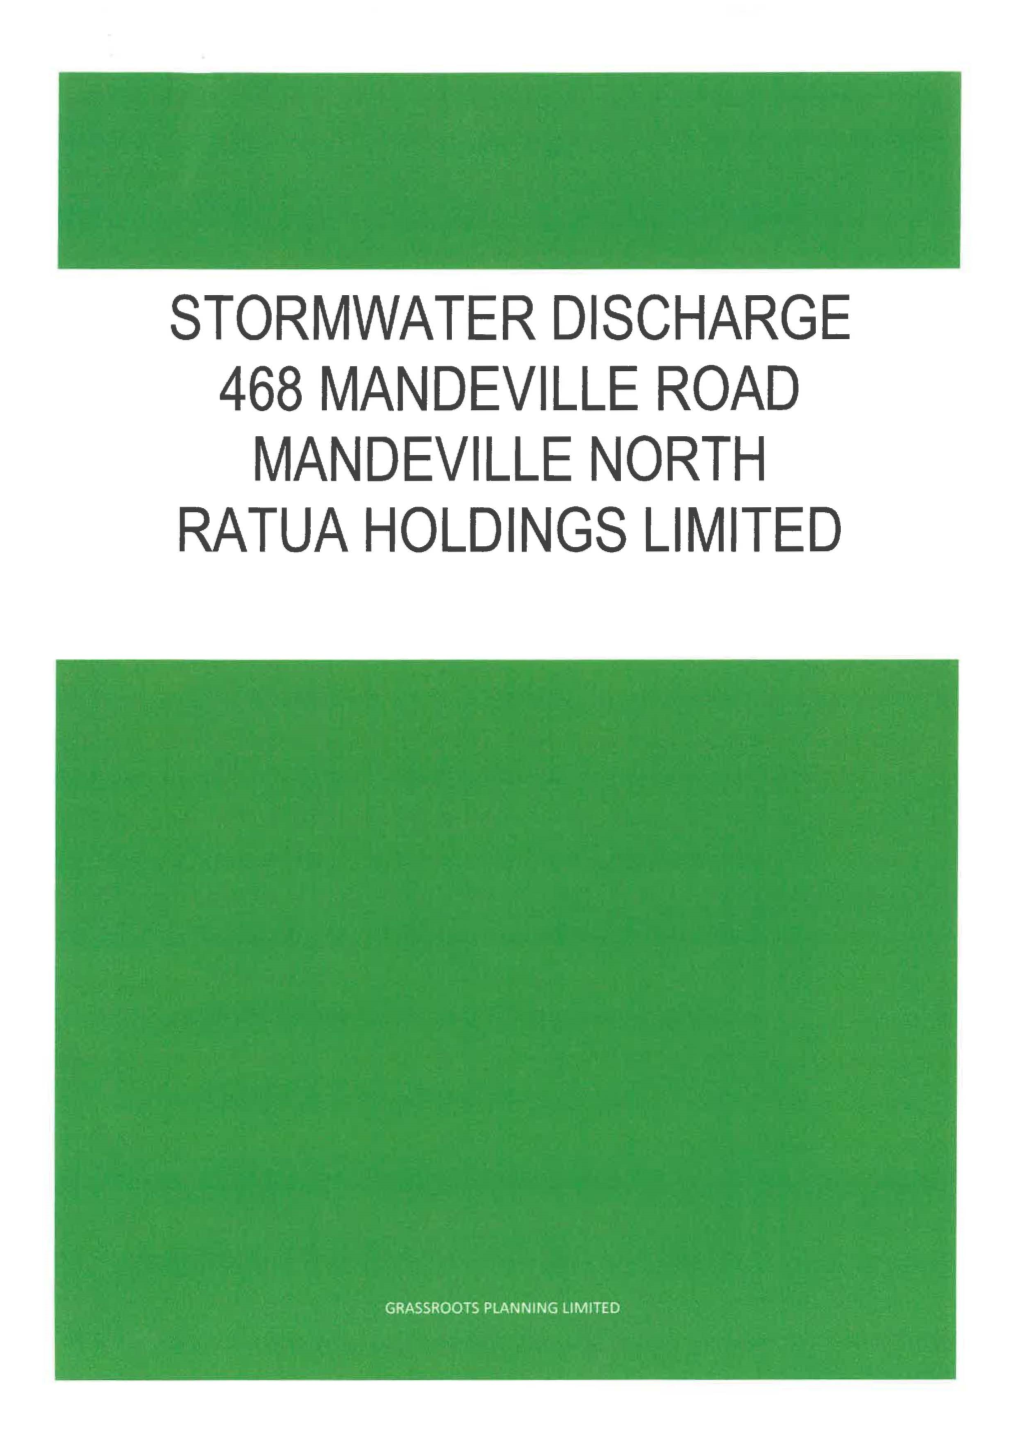 STORMWATER DISCHARGE 468 MANDEVILLE ROAD MANDEVILLE NORTH RATUA HOLDINGS LIMITED Quality Assurance